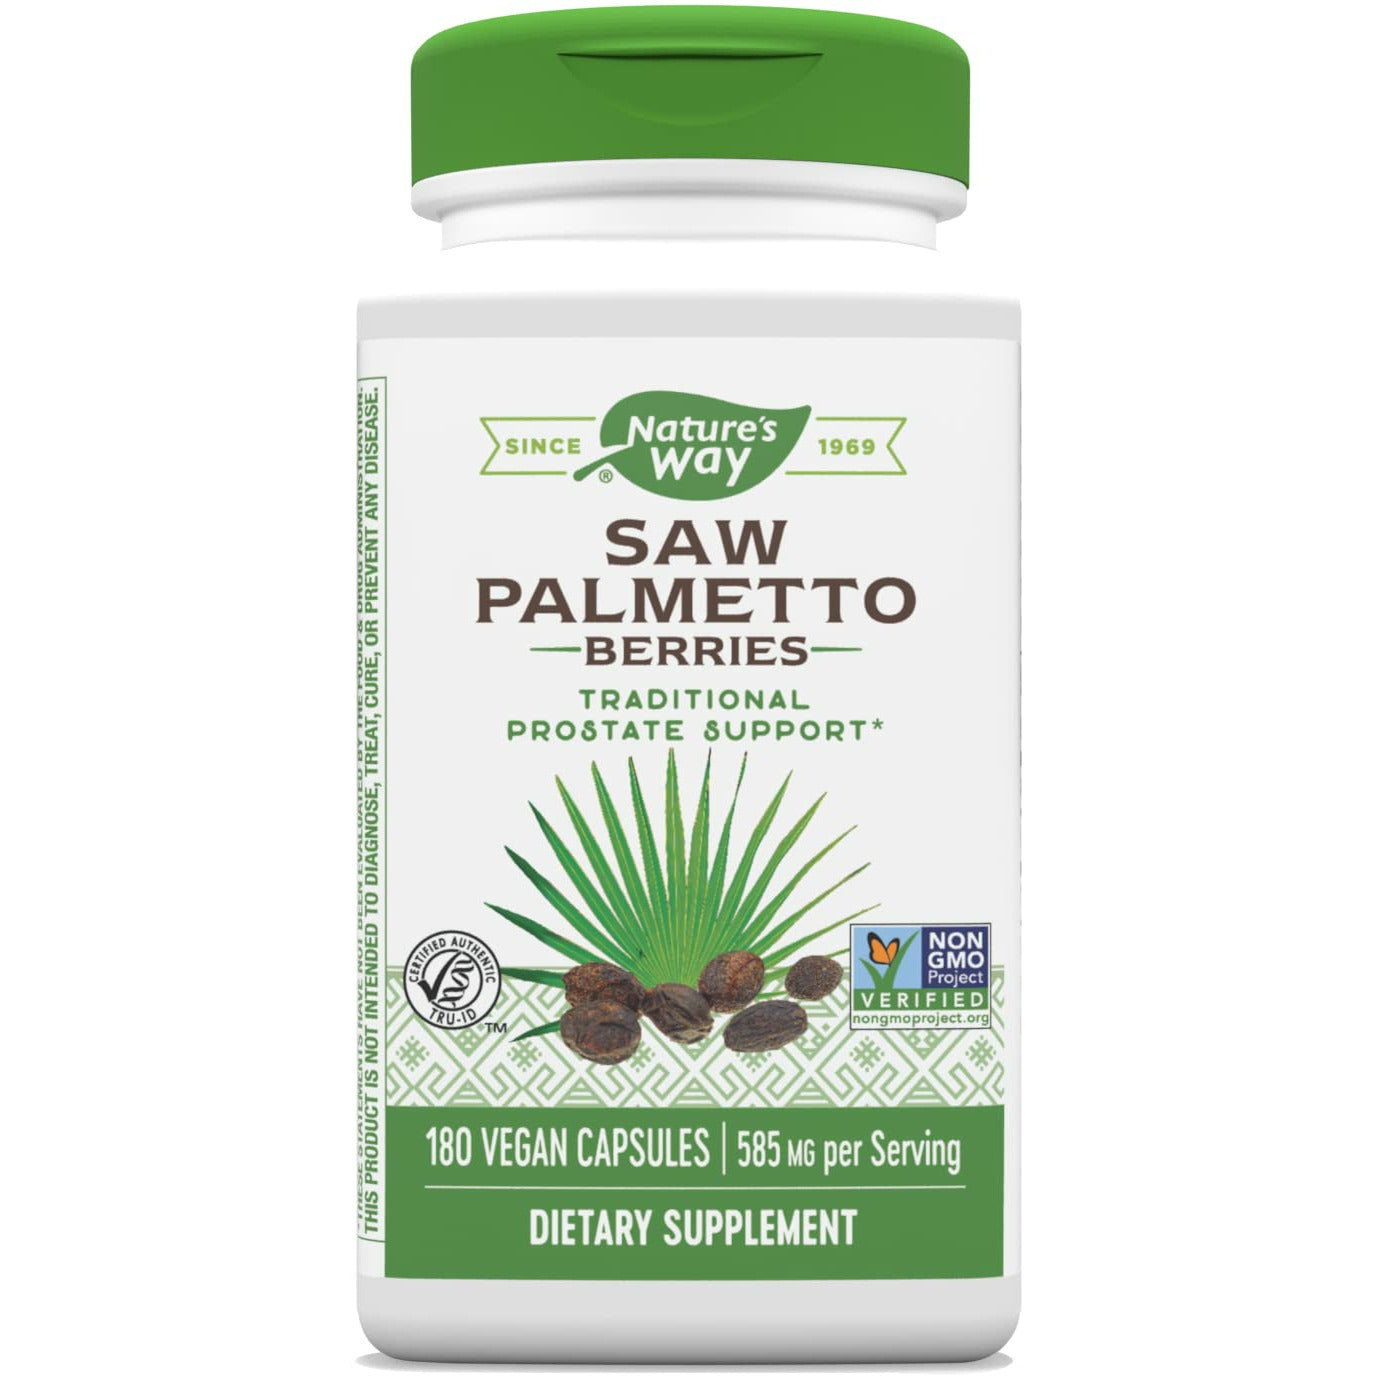 Nature's Way Saw Palmetto Berries